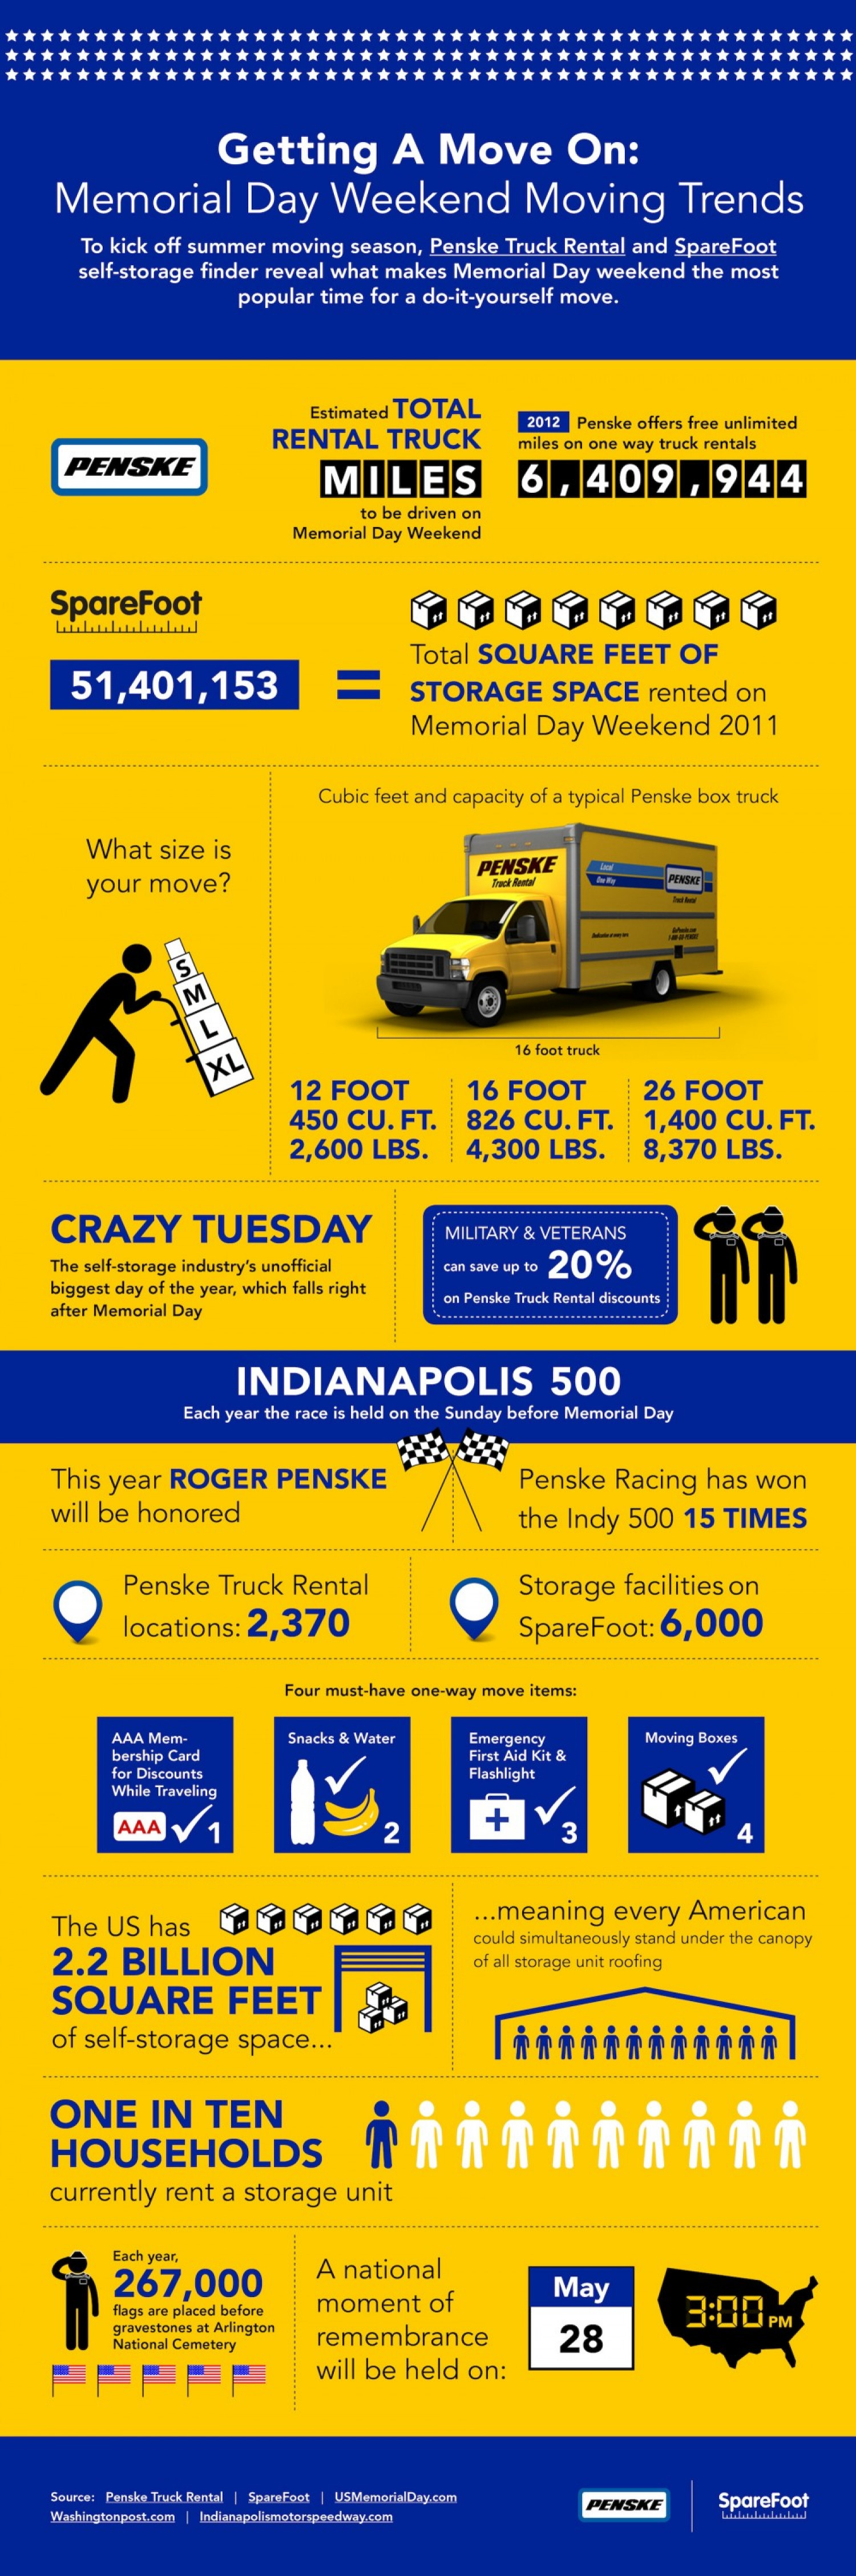 Getting A Move On: Memorial Day Moving Trends Infographic